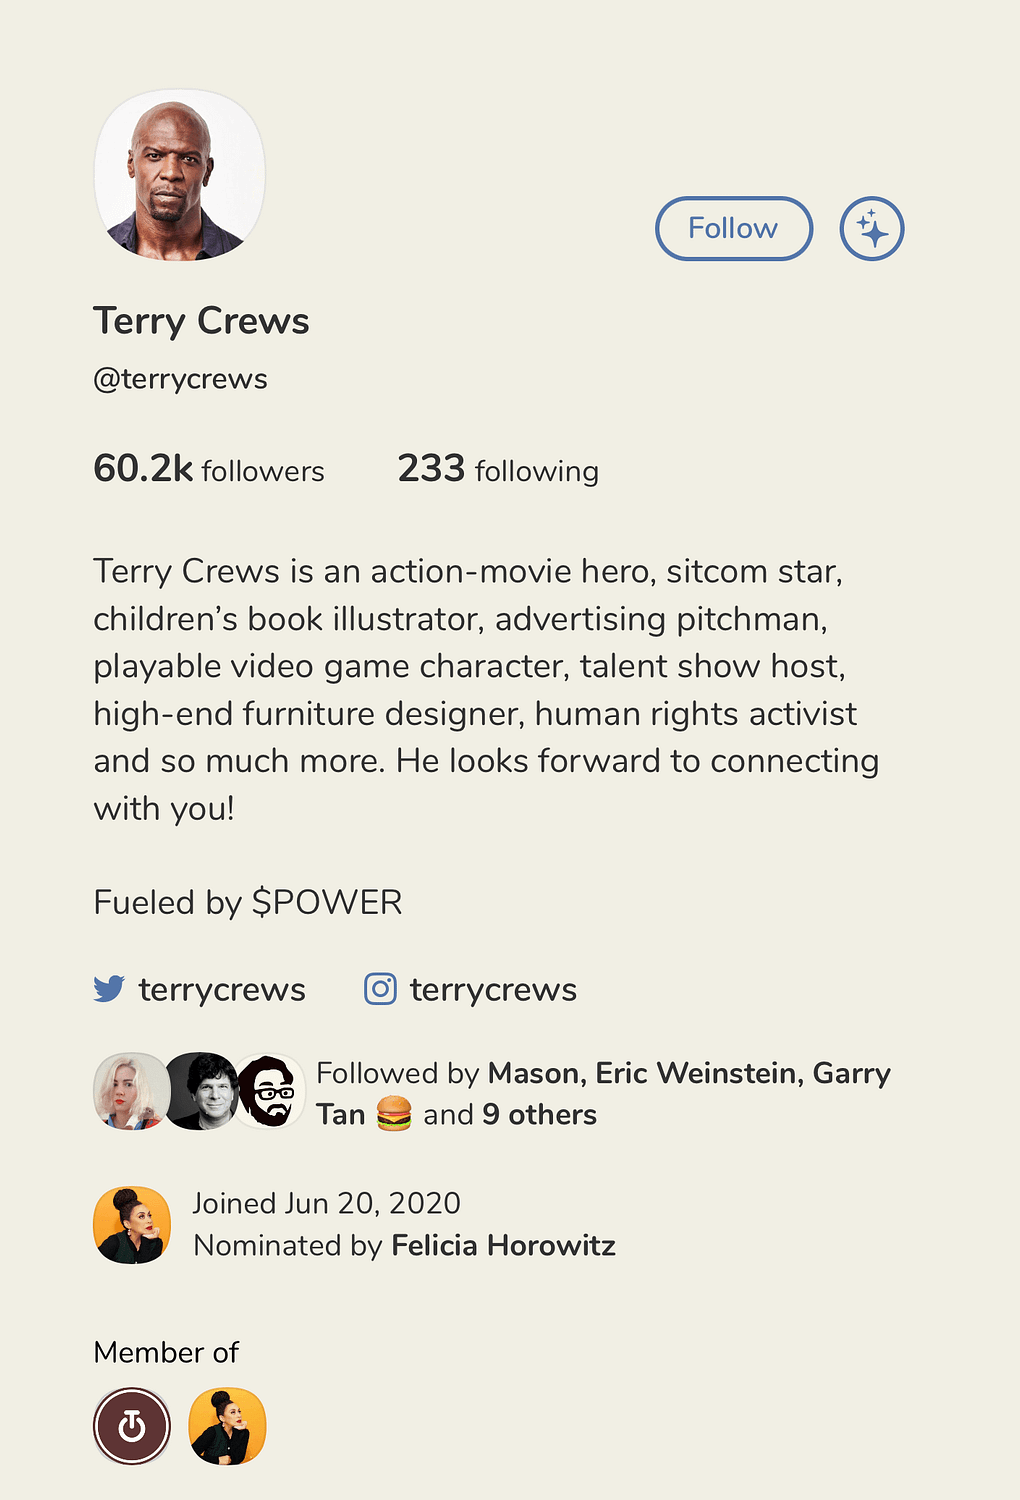 Terry Crews' profile, one of the many celebrities helping grow Clubhouse statistics. 